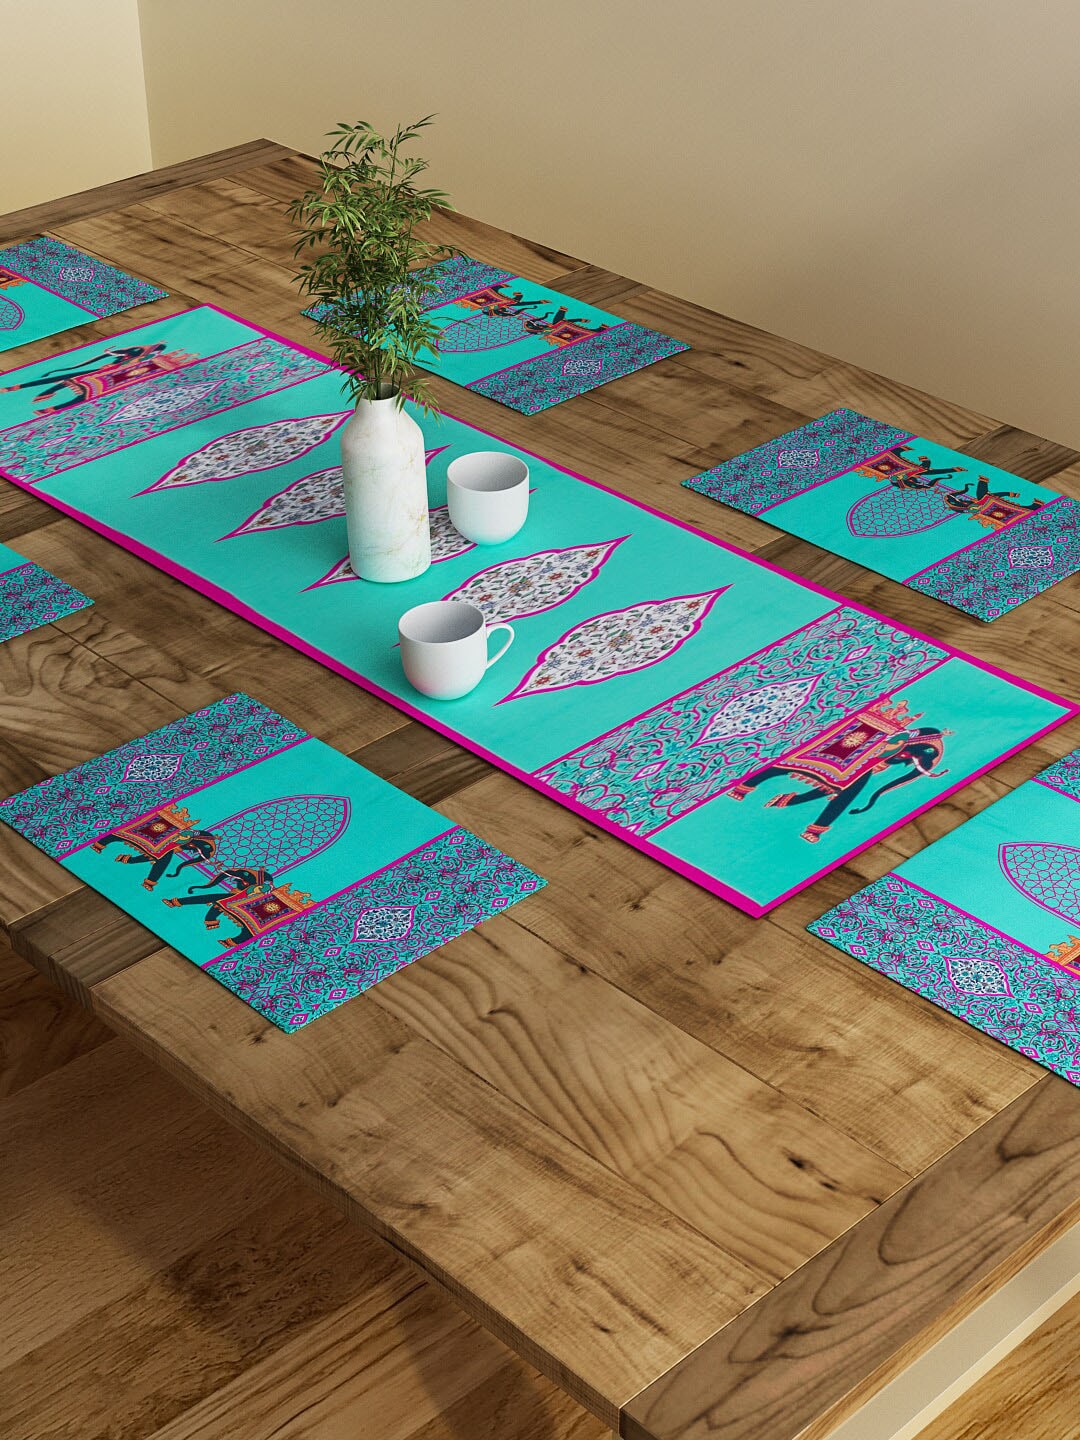 SEJ by Nisha Gupta Set of 6 Table Placemats & Runner Price in India